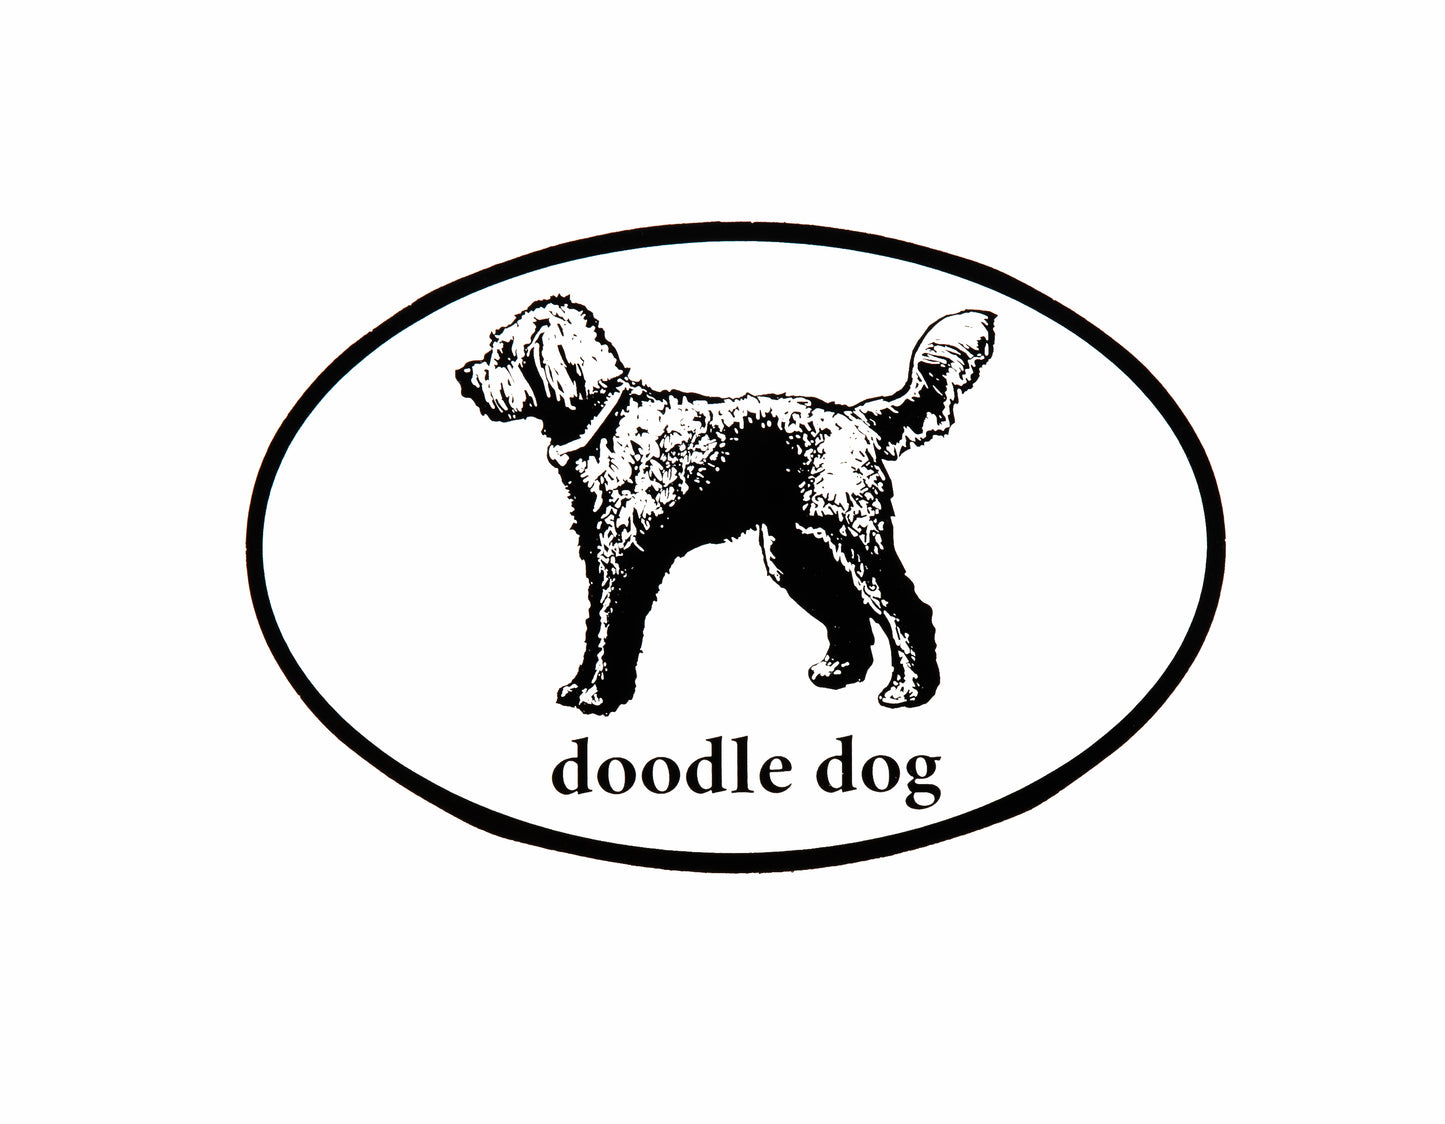 The Classic Doodle Dog Bumper Sticker (with text) - Doodle Dog